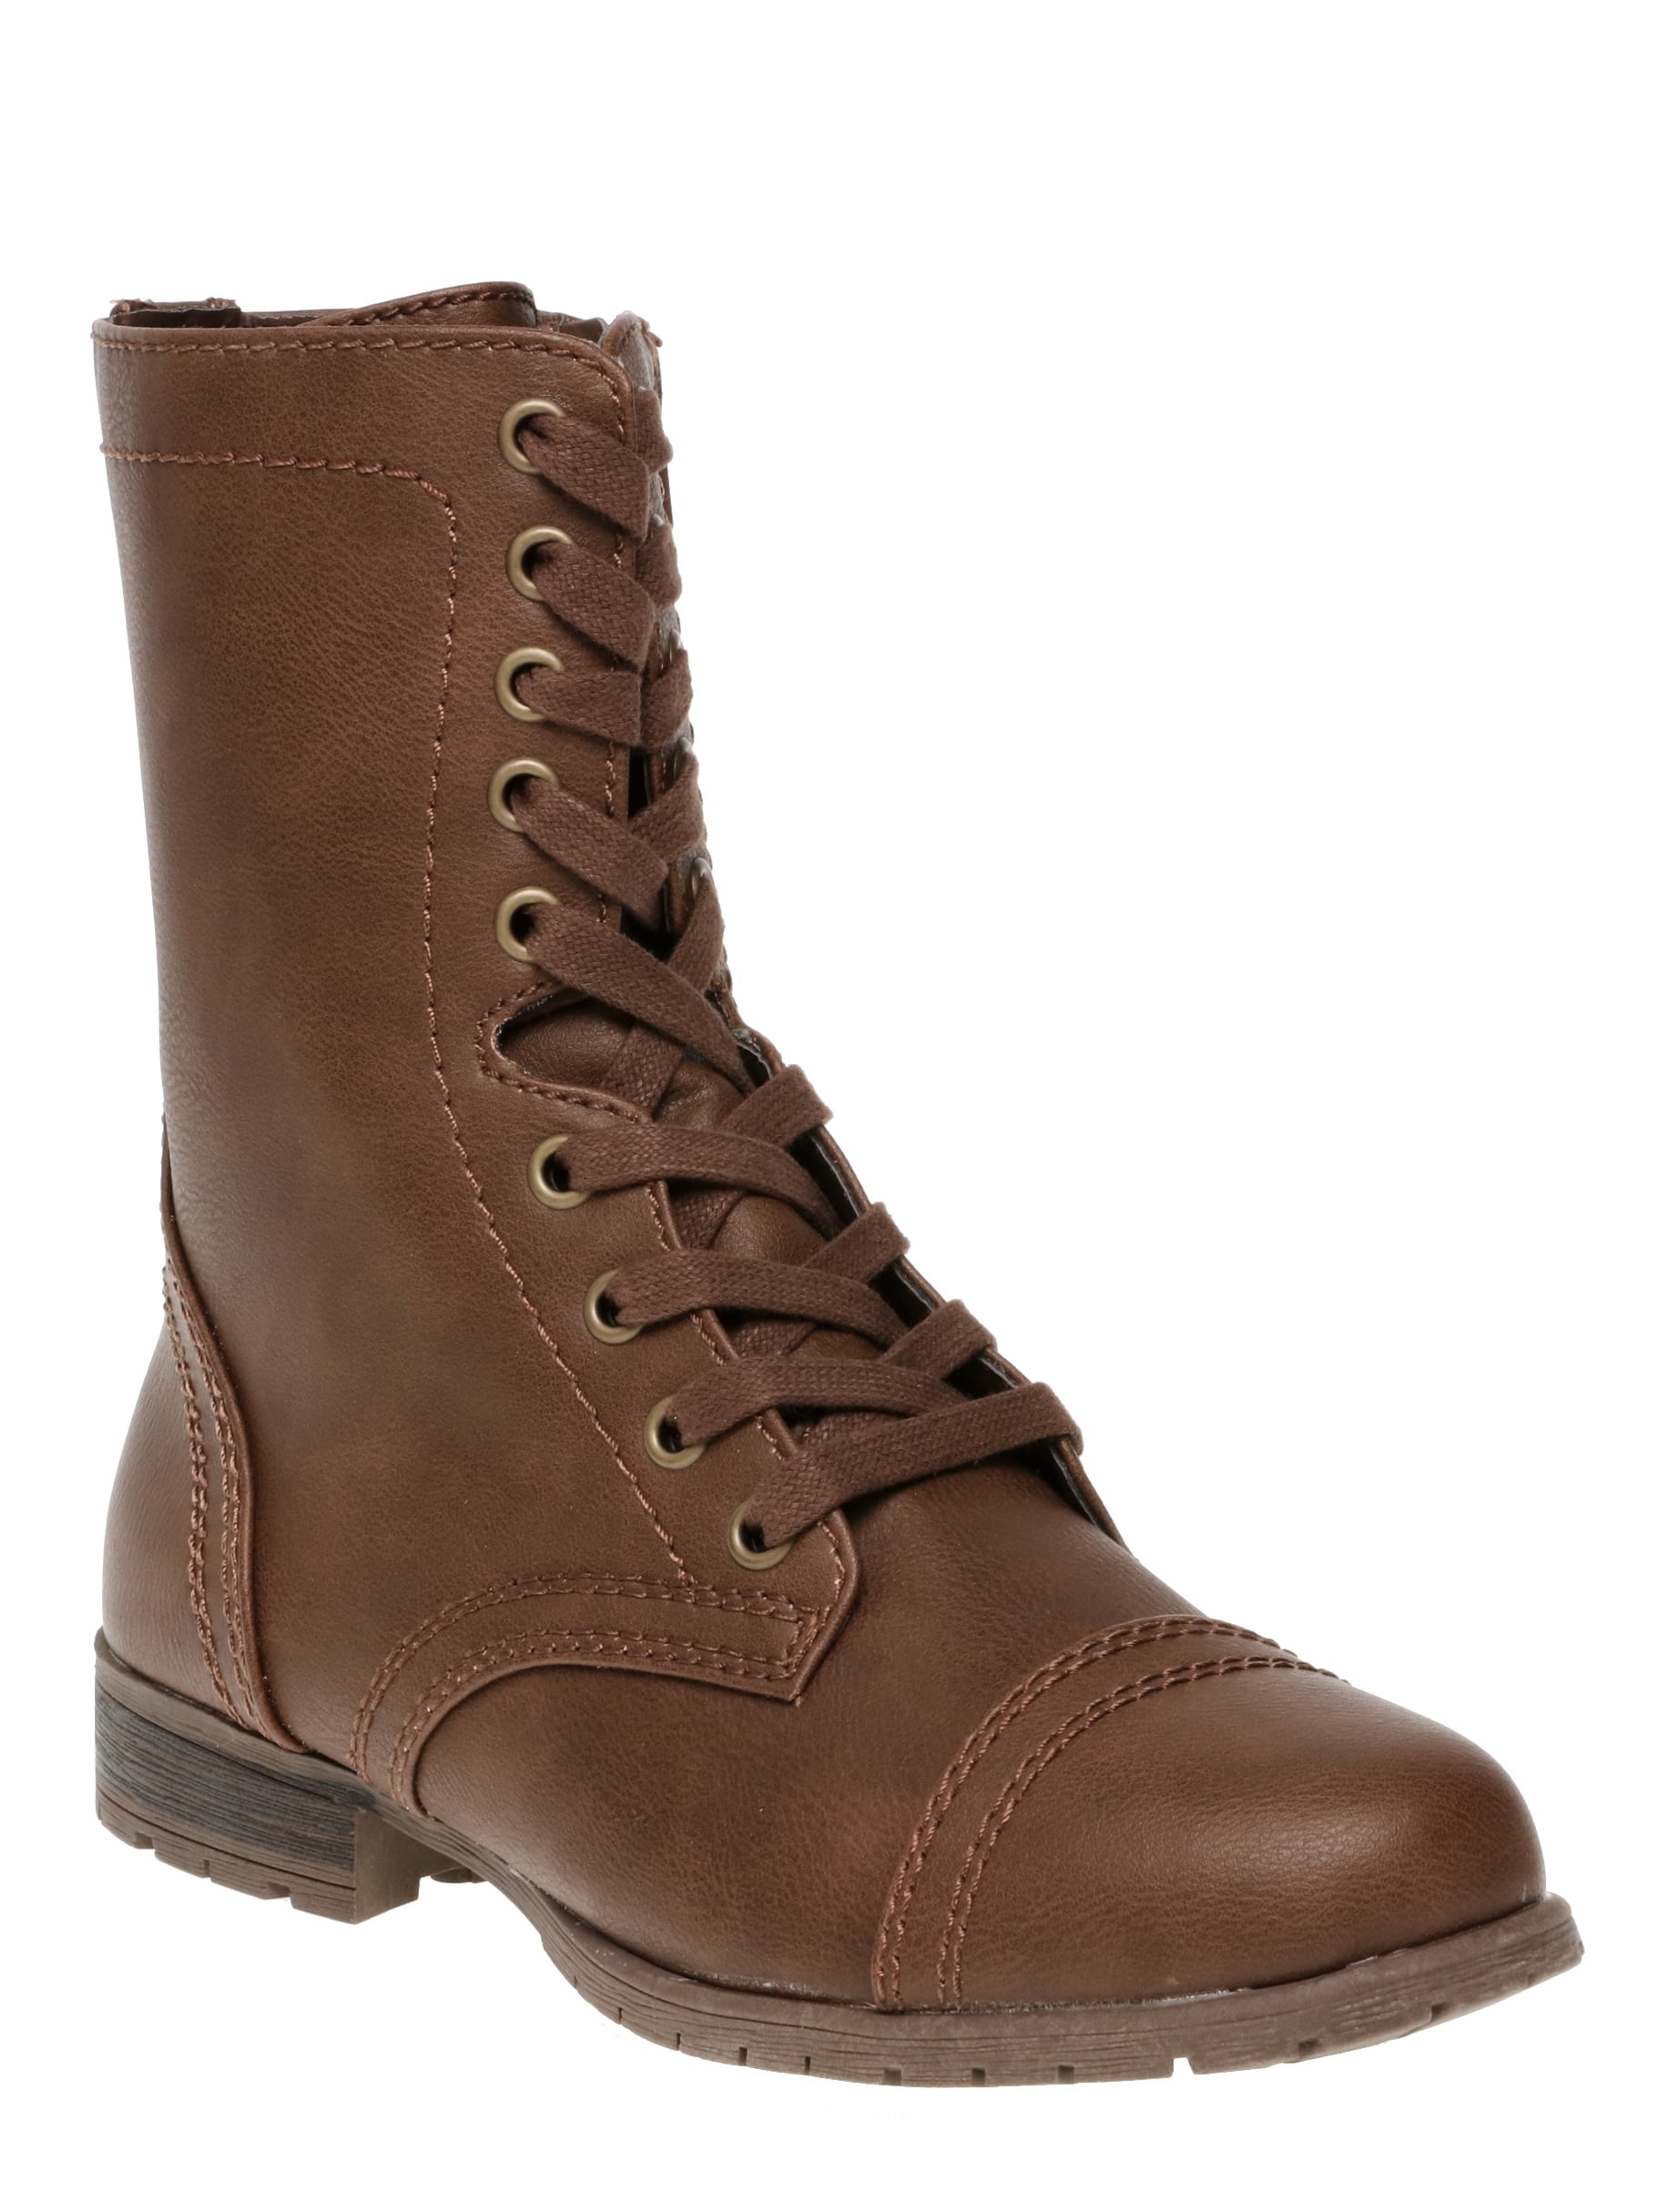 Women's Time and Tru Lace Up Boot - Walmart.com